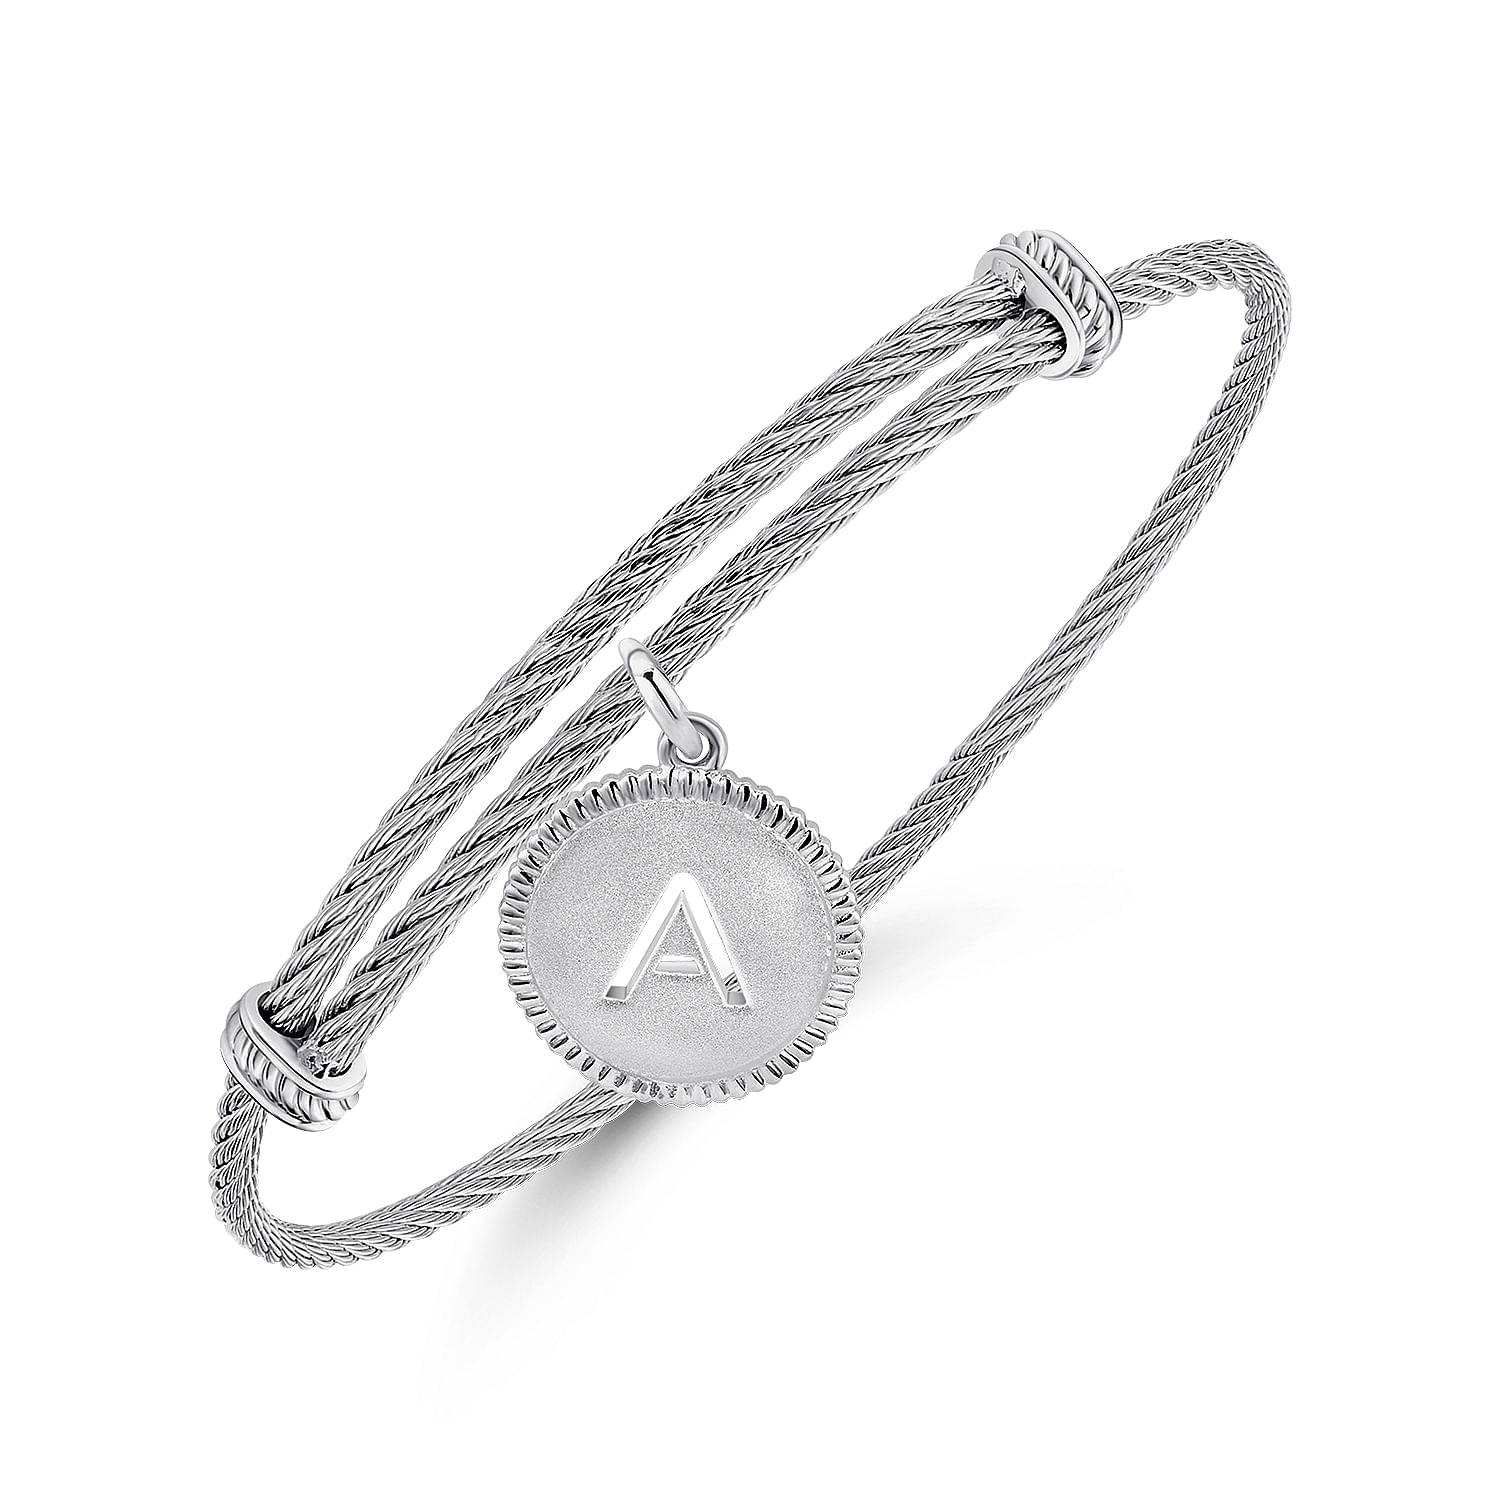 Adjustable-Twisted-Cable-Stainless-Steel-Bangle-with-Sterling-Silver-A-Initial-Charm2